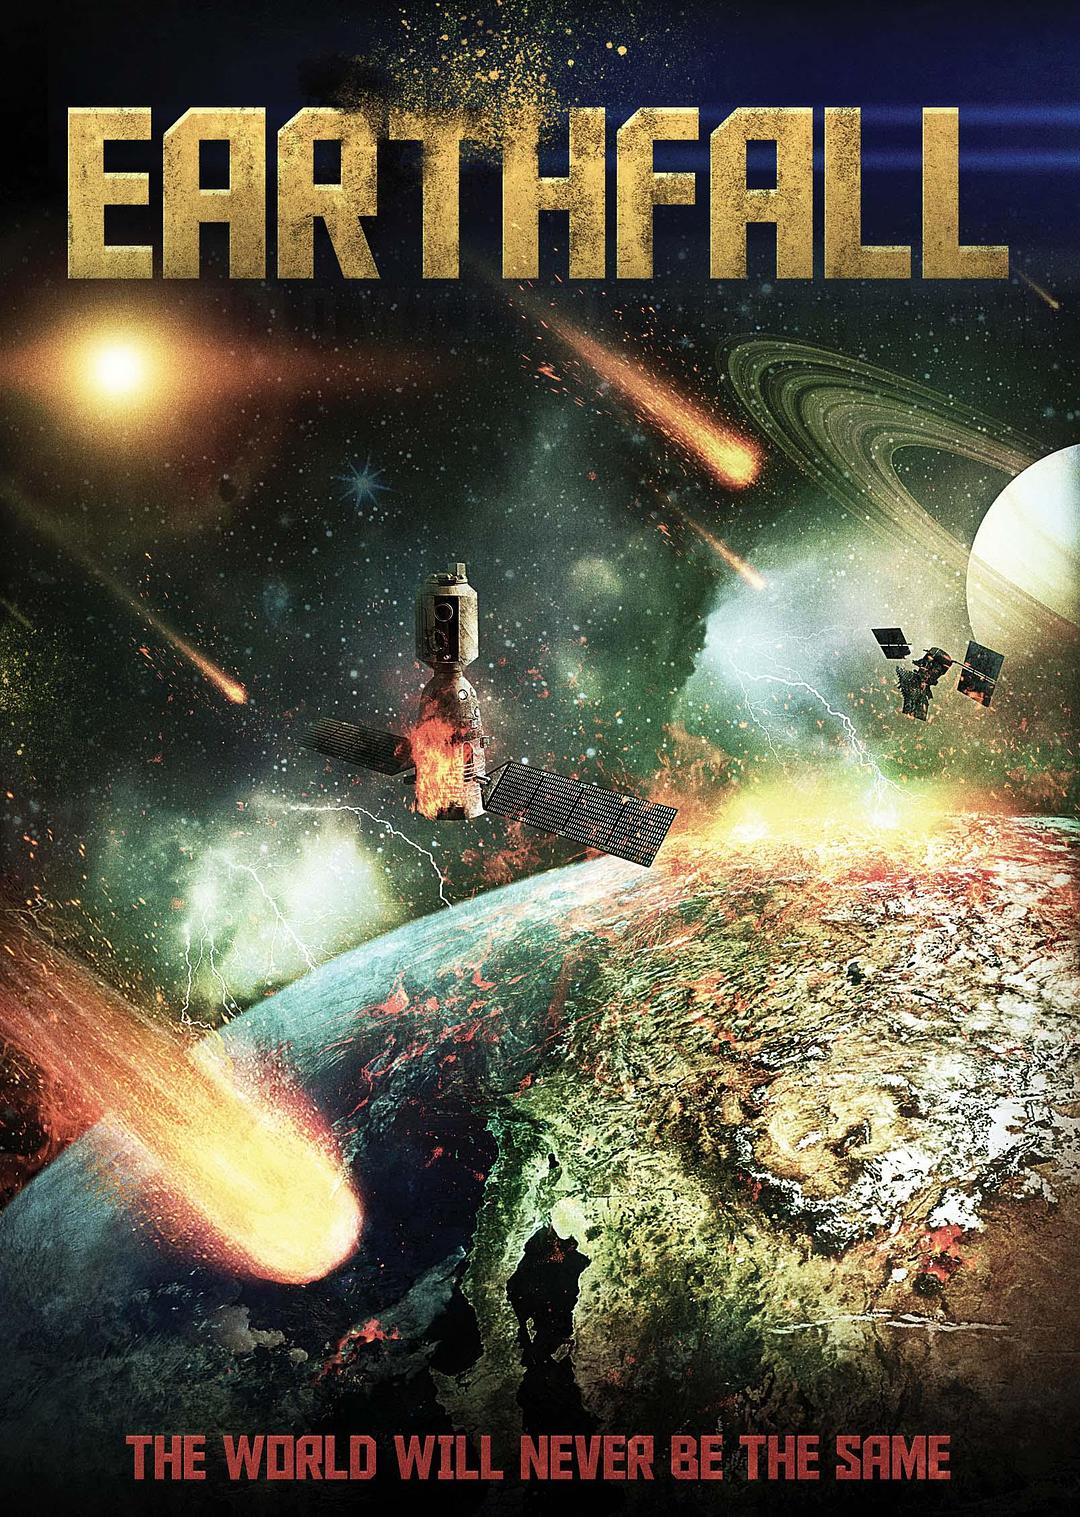 ׹ Earthfall.2015.1080p.BluRay.x264-PussyFoot 7.64GB-1.png